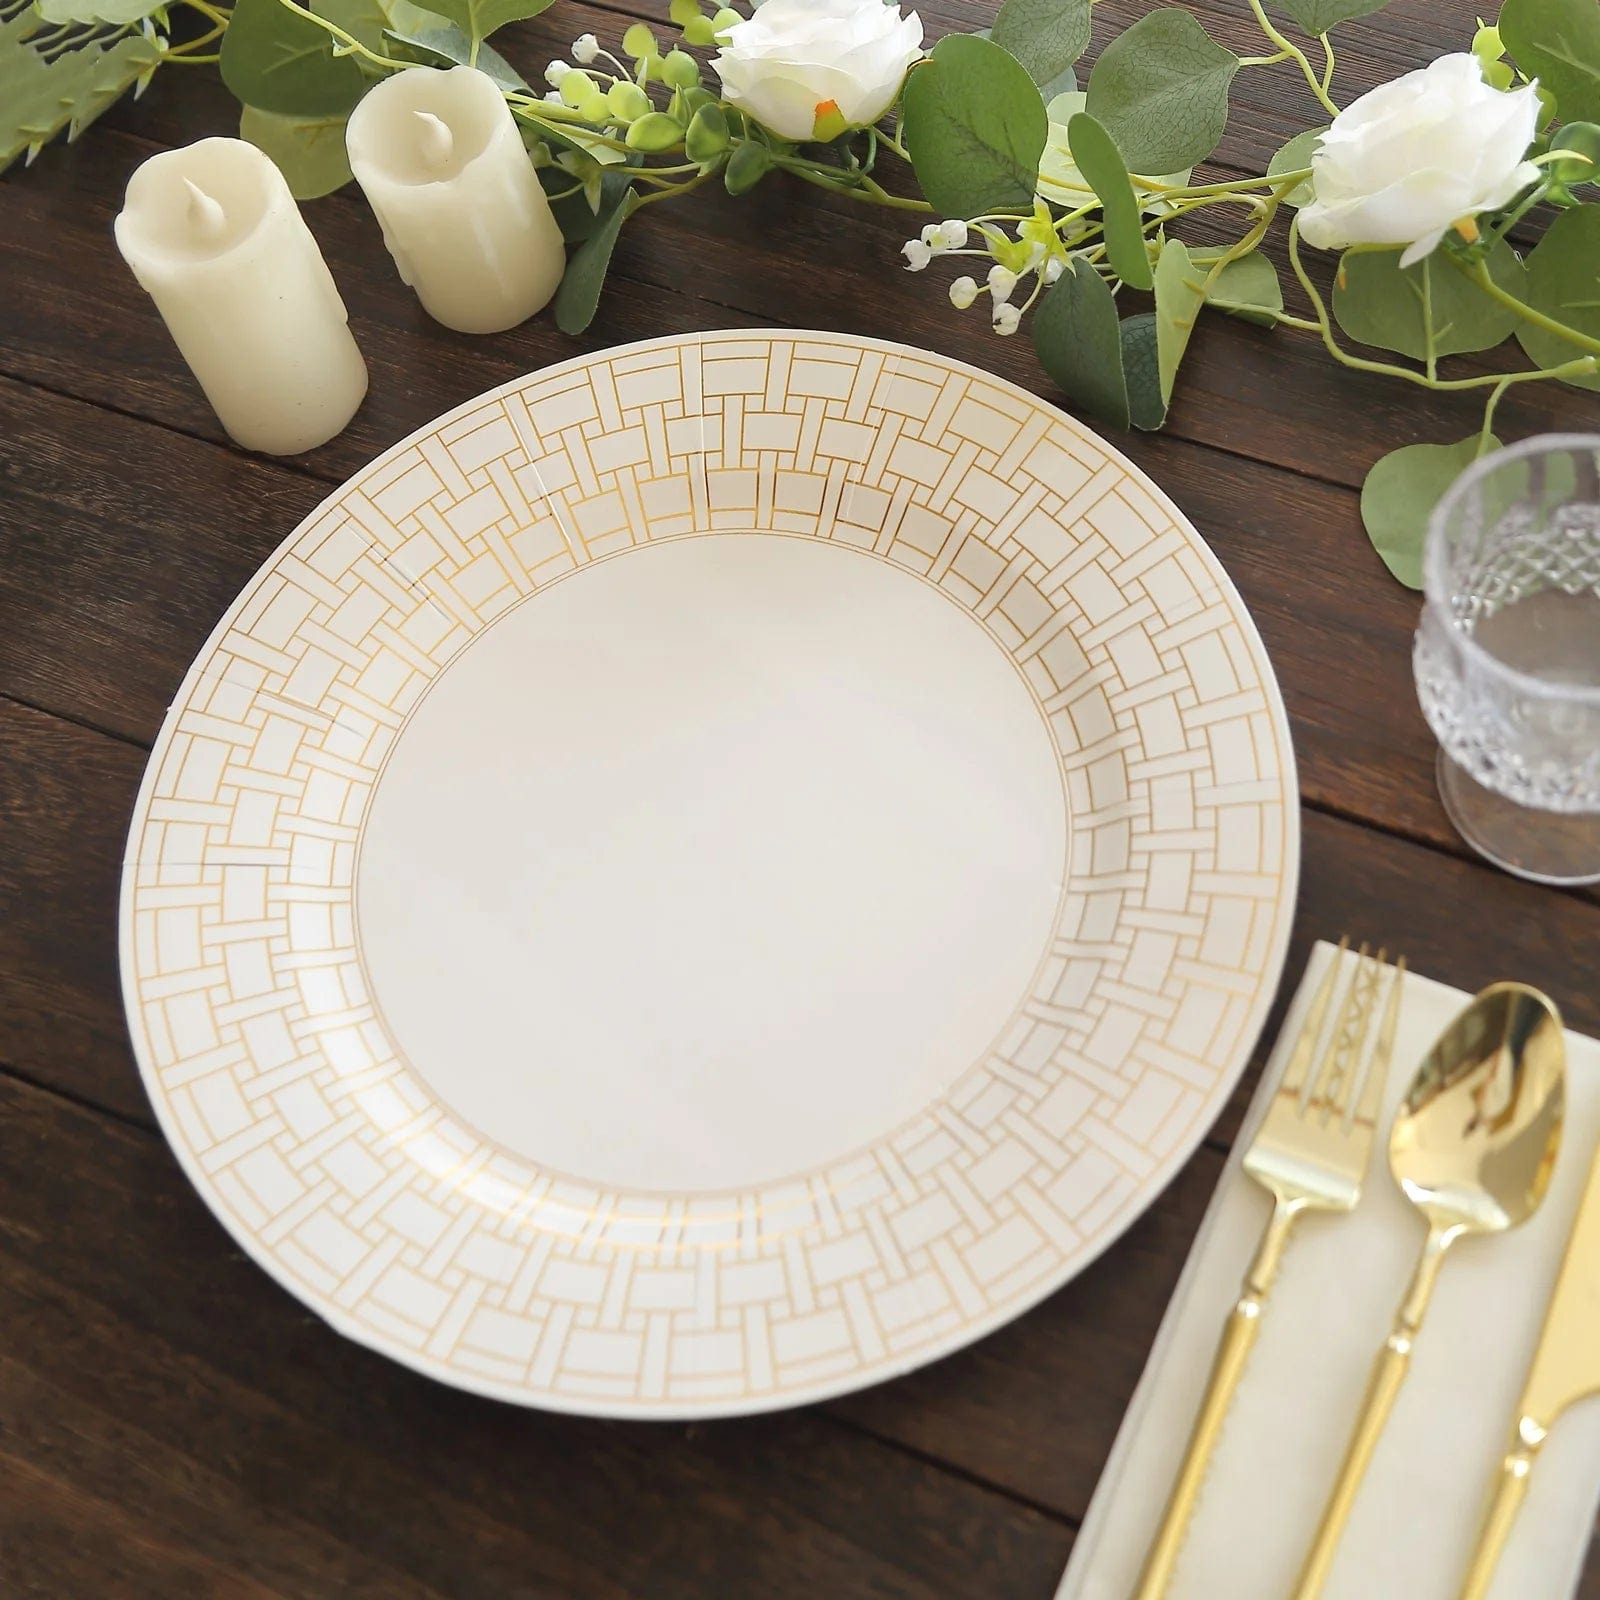 10 Cardstock Paper Charger Plates with Basketweave Pattern Rim - White and Gold DSP_CHRG_R0028_WHGD